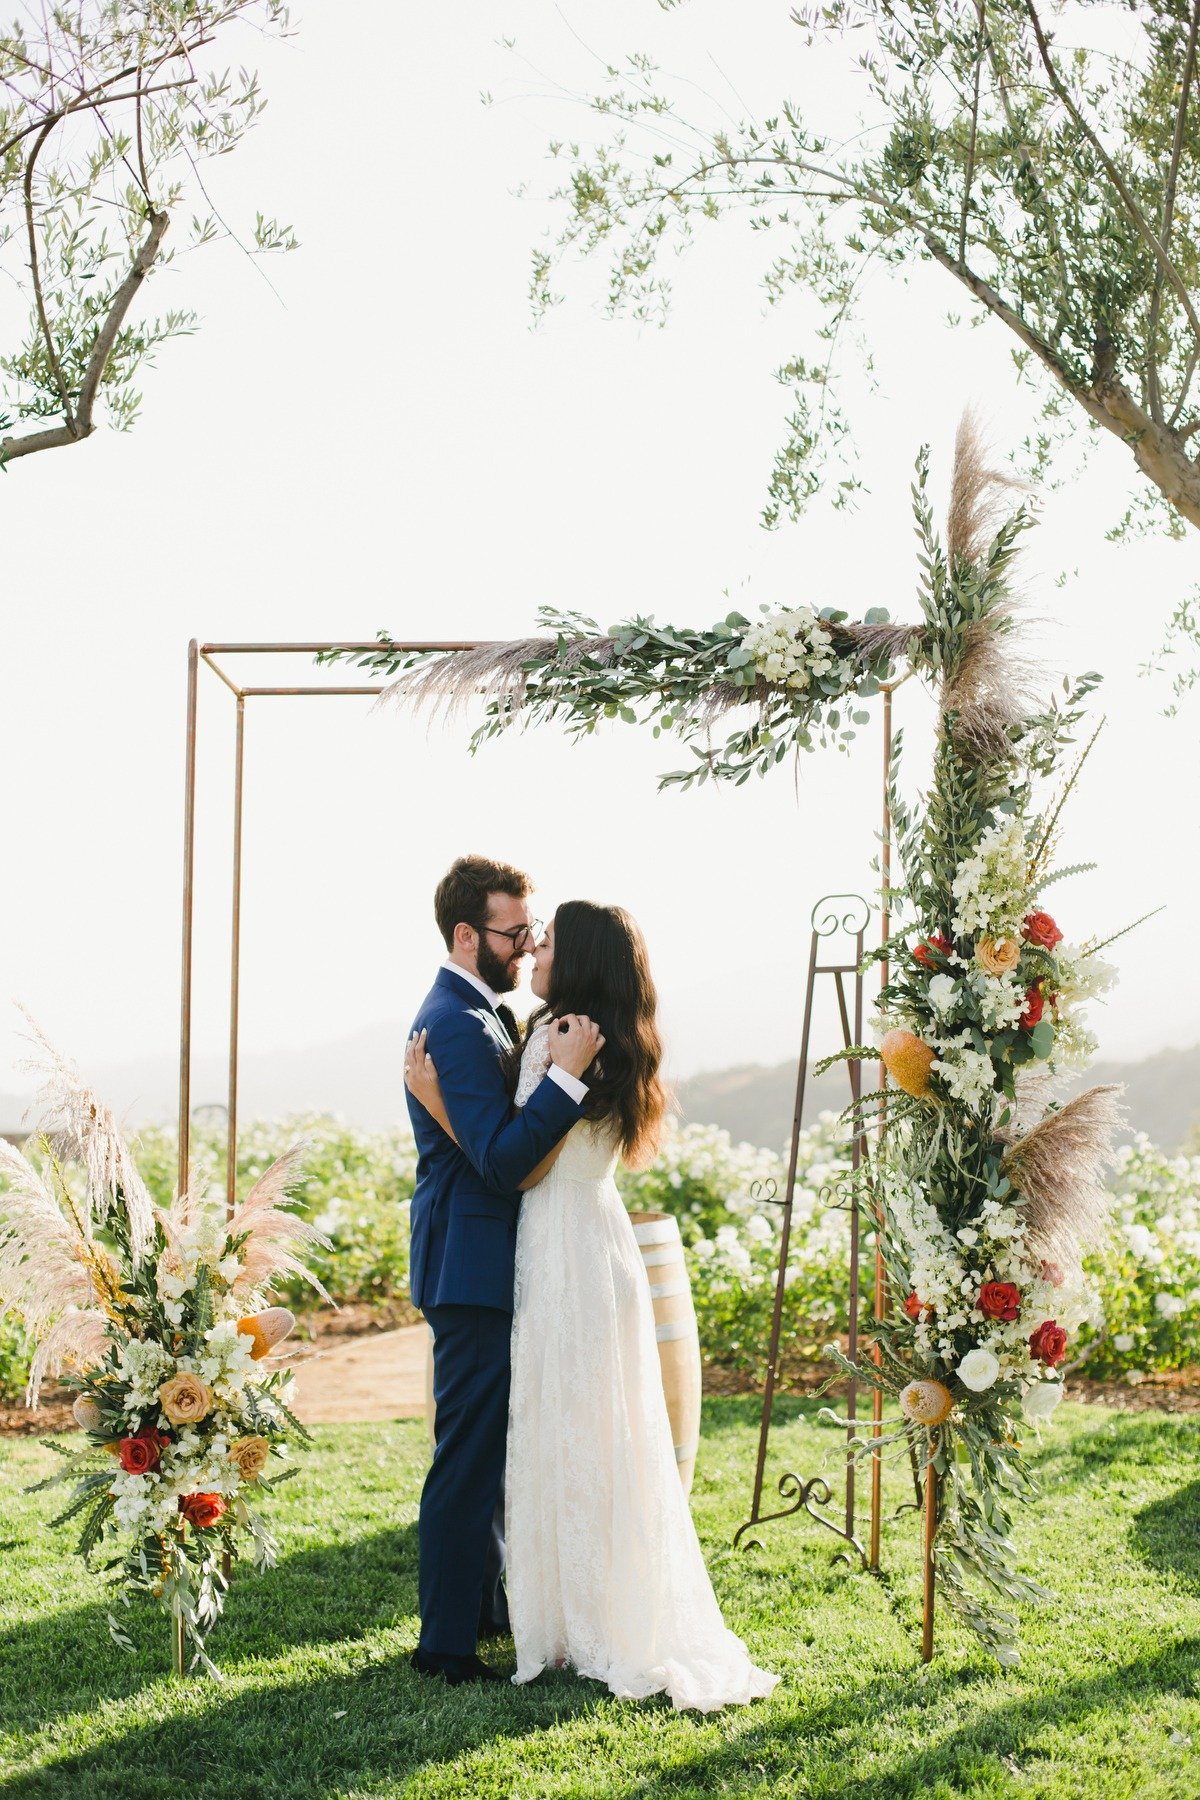 Family-style outdoor wedding in California